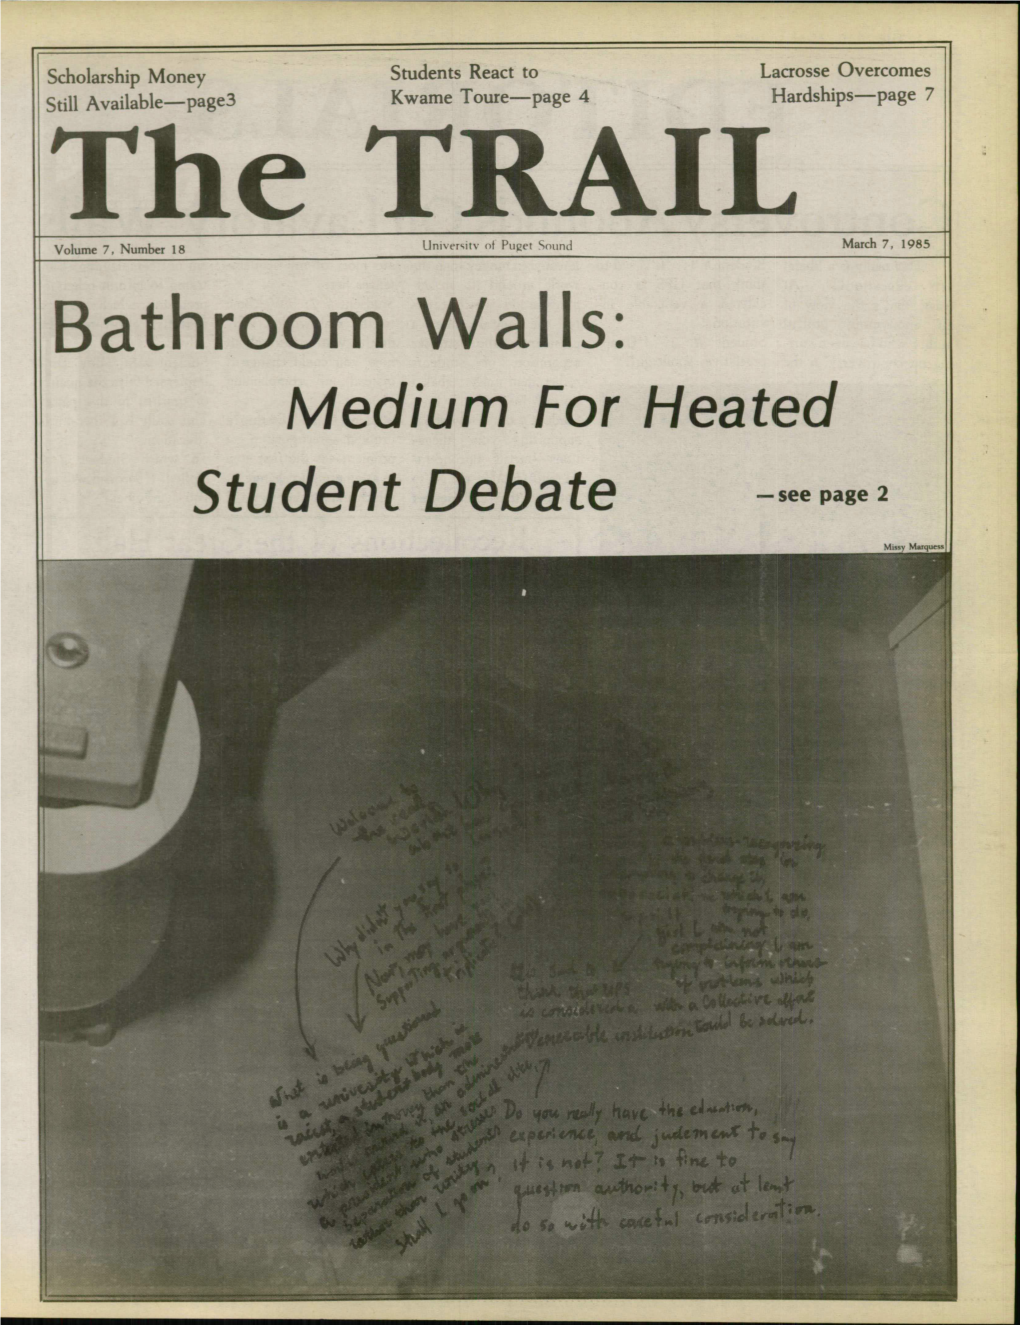 The TRAIL Volume 7, Number 18 University of Puget Sound � March 7, 1985 Bathroom Walls: Medium for Heated